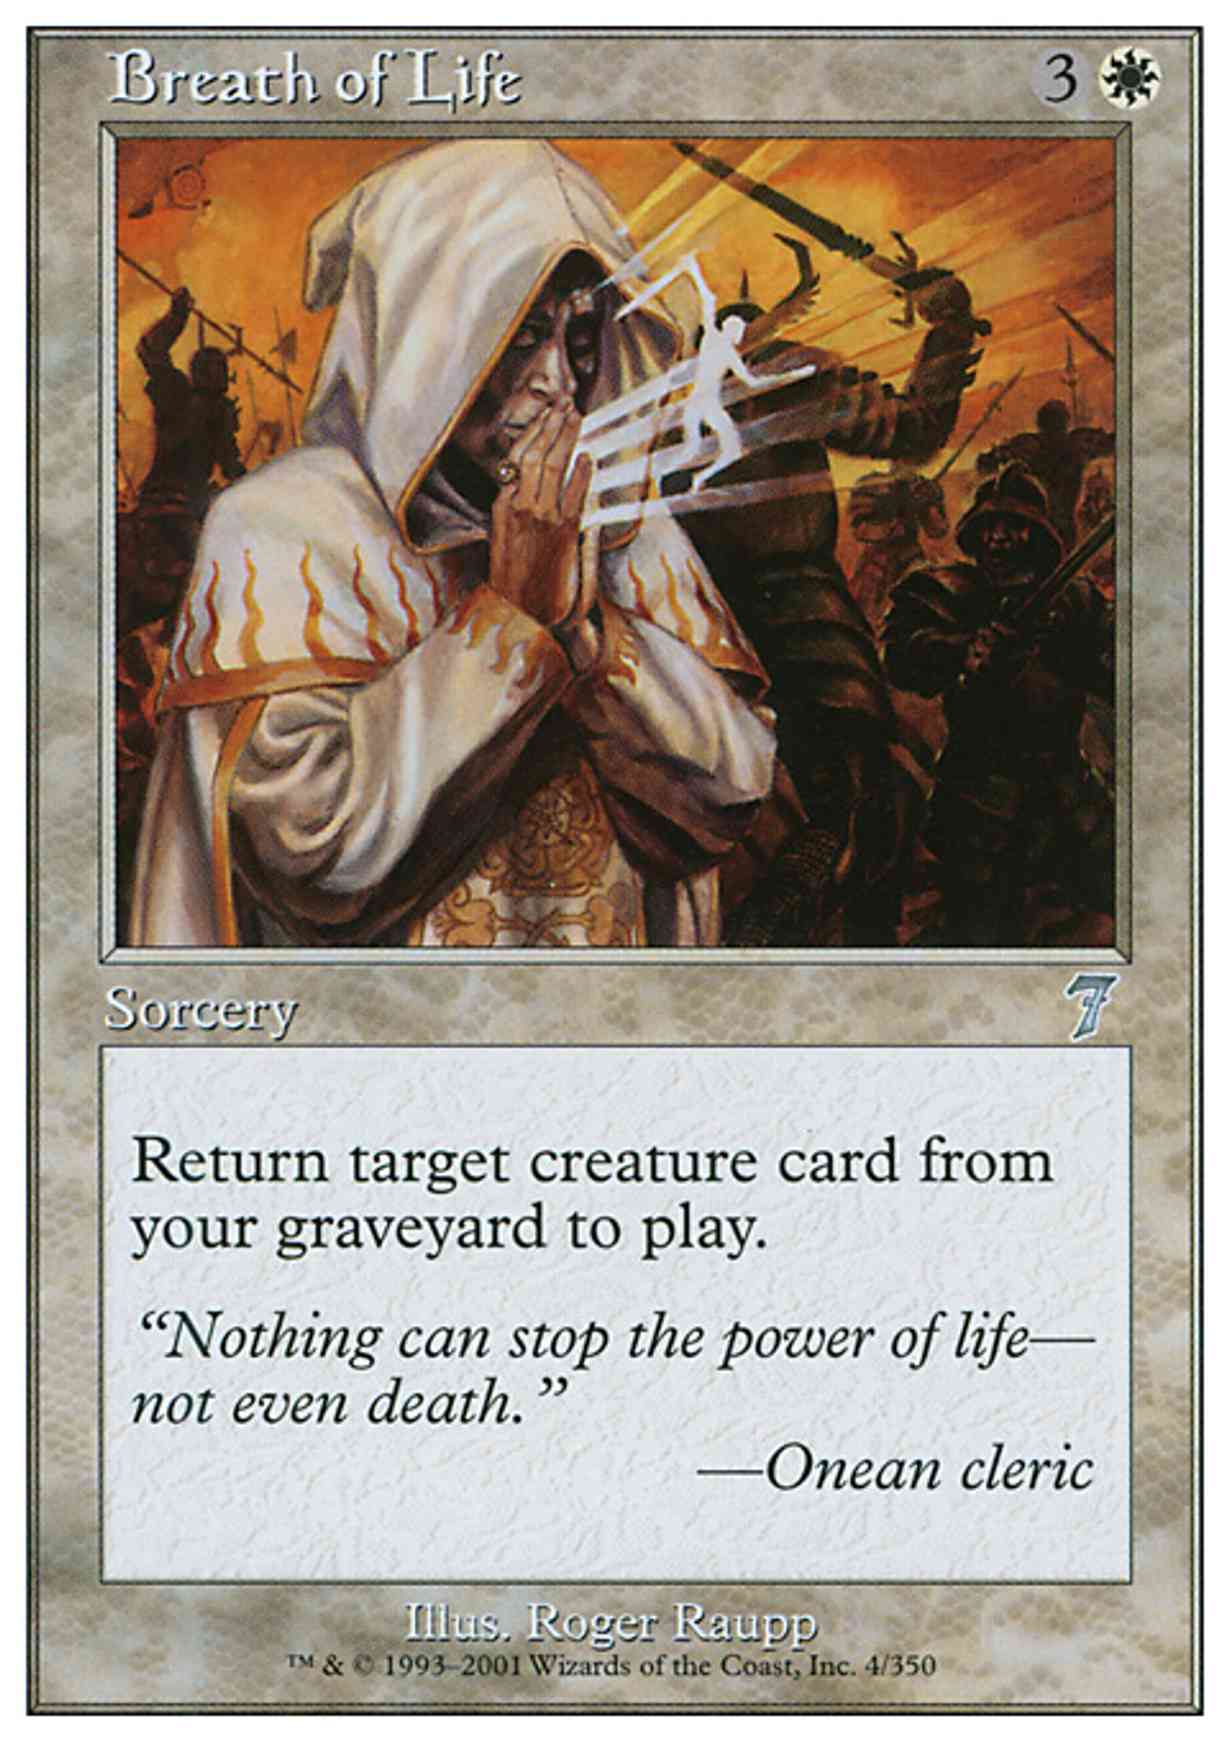 Breath of Life magic card front